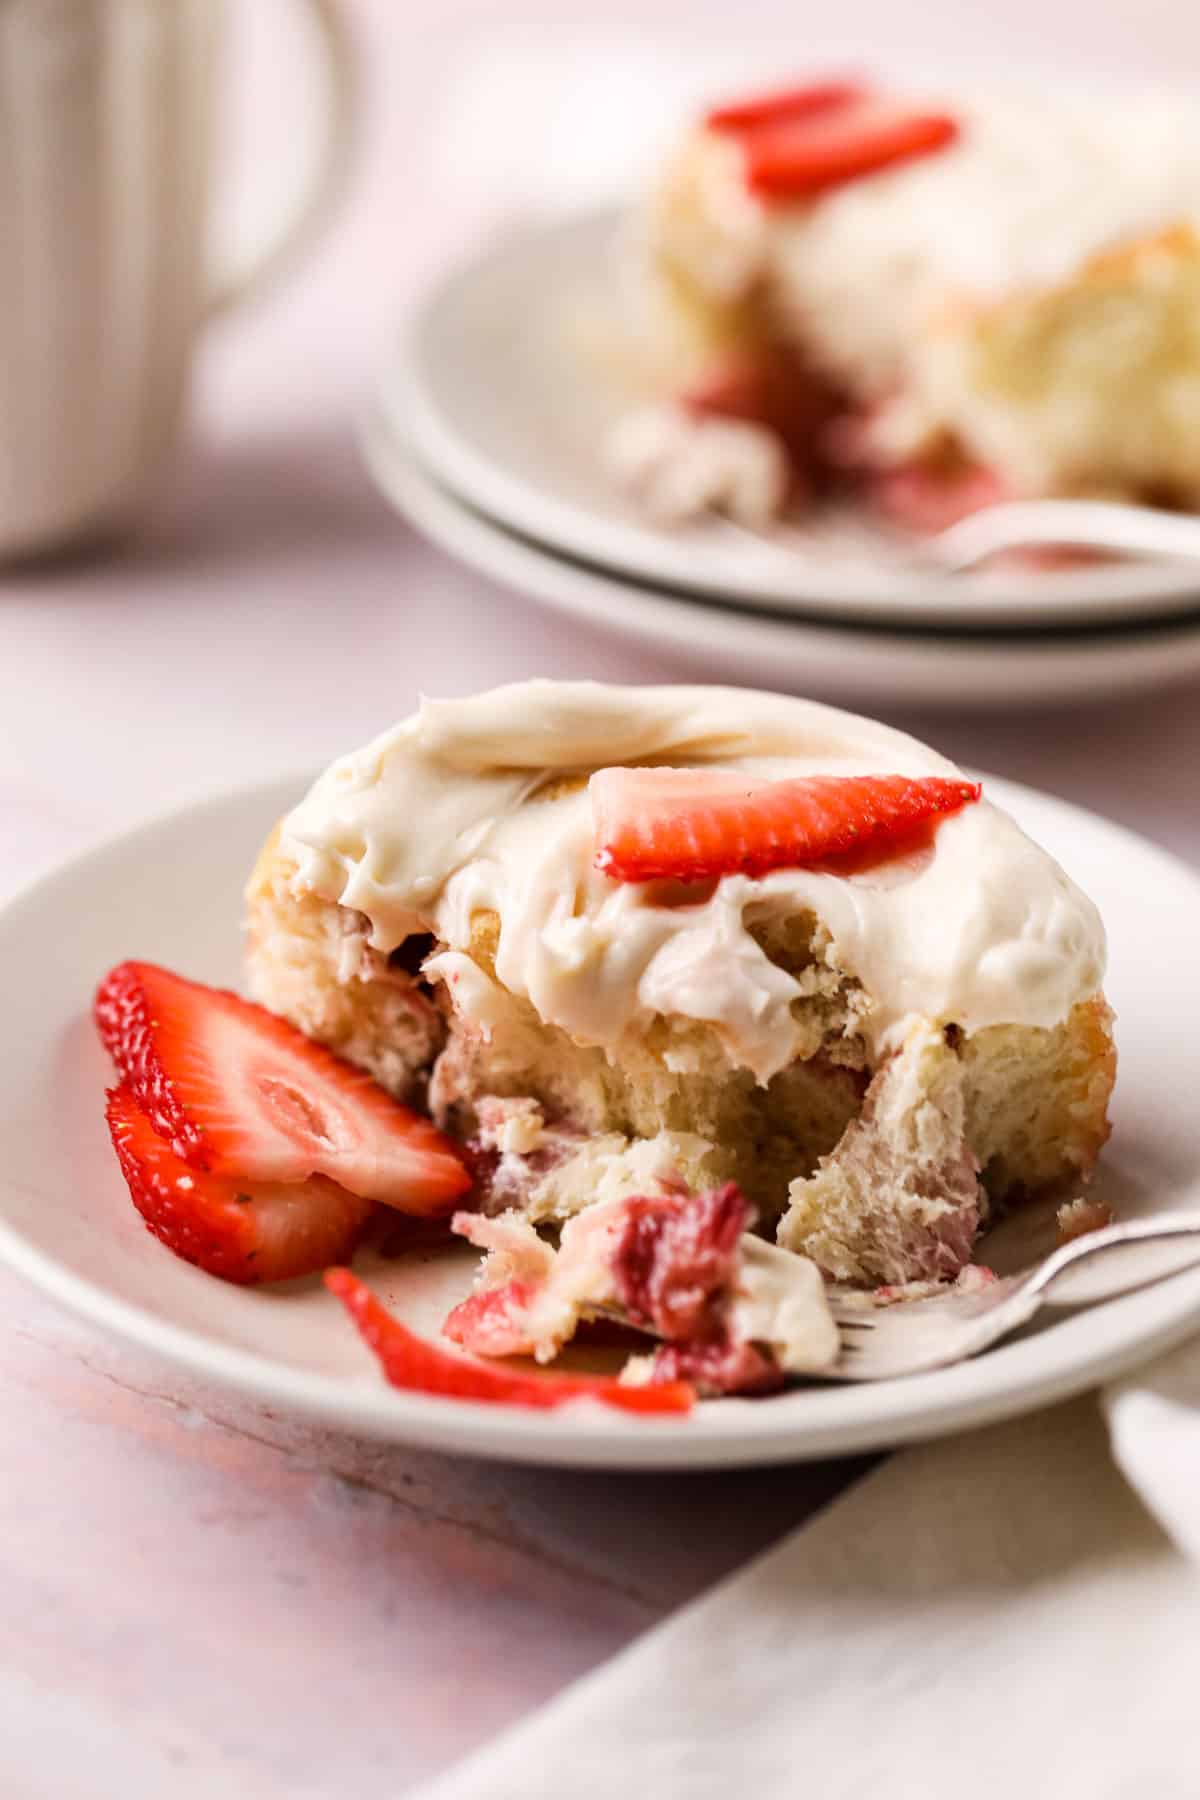 Dish with a fresh strawberry cinnamon rolls topped with fresh sliced strawberries and bite taken out of it.